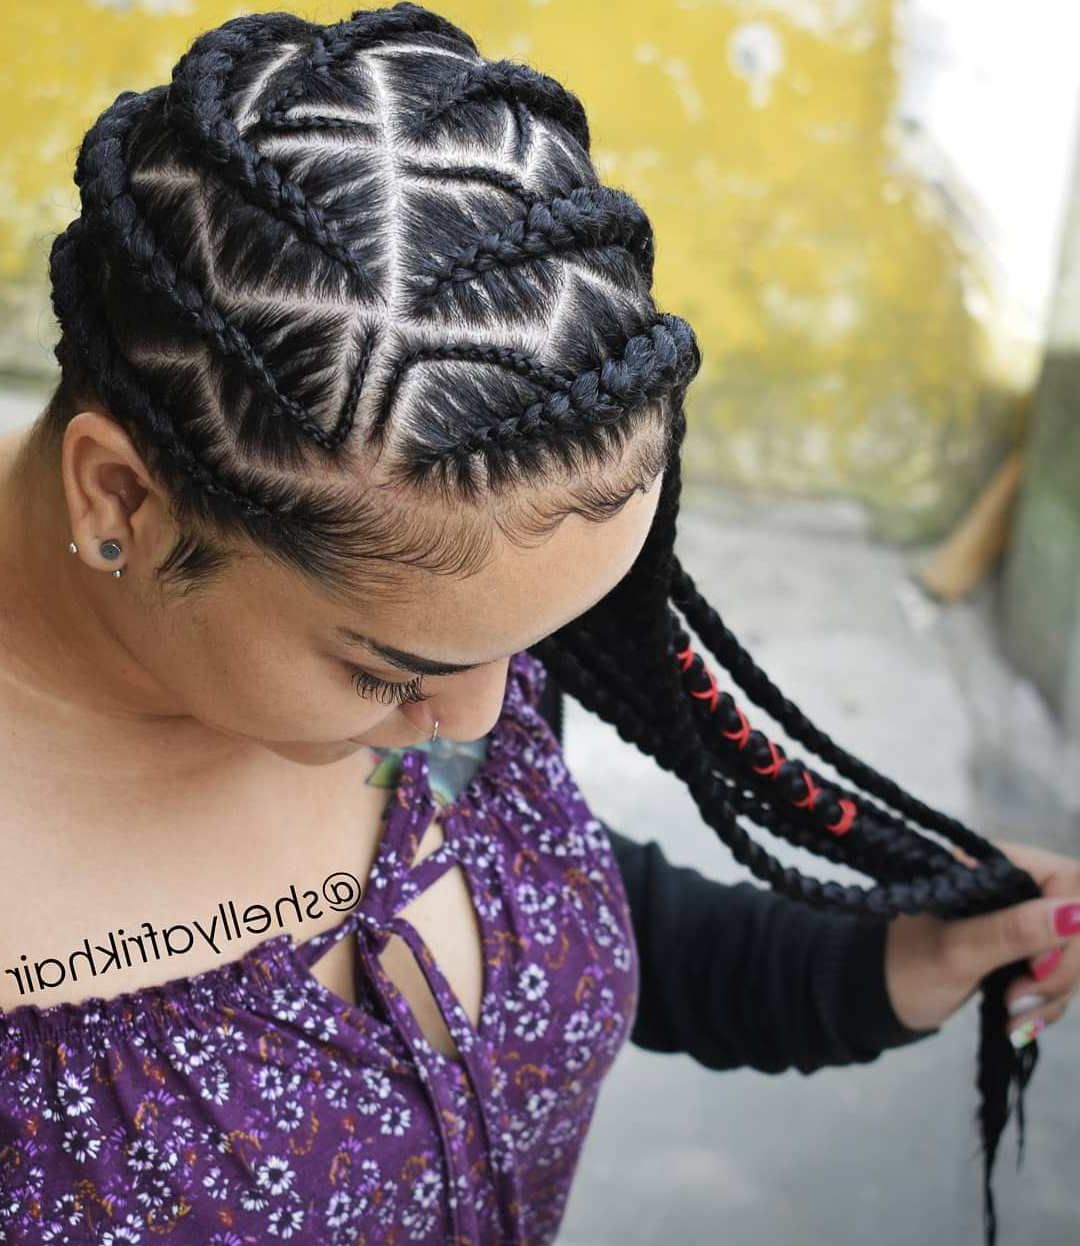 Preferred Wrap Around Triangular Braided Hairstyles Pertaining To 20 Head Turning Lemonade Braid Styles For All Ages (View 13 of 20)